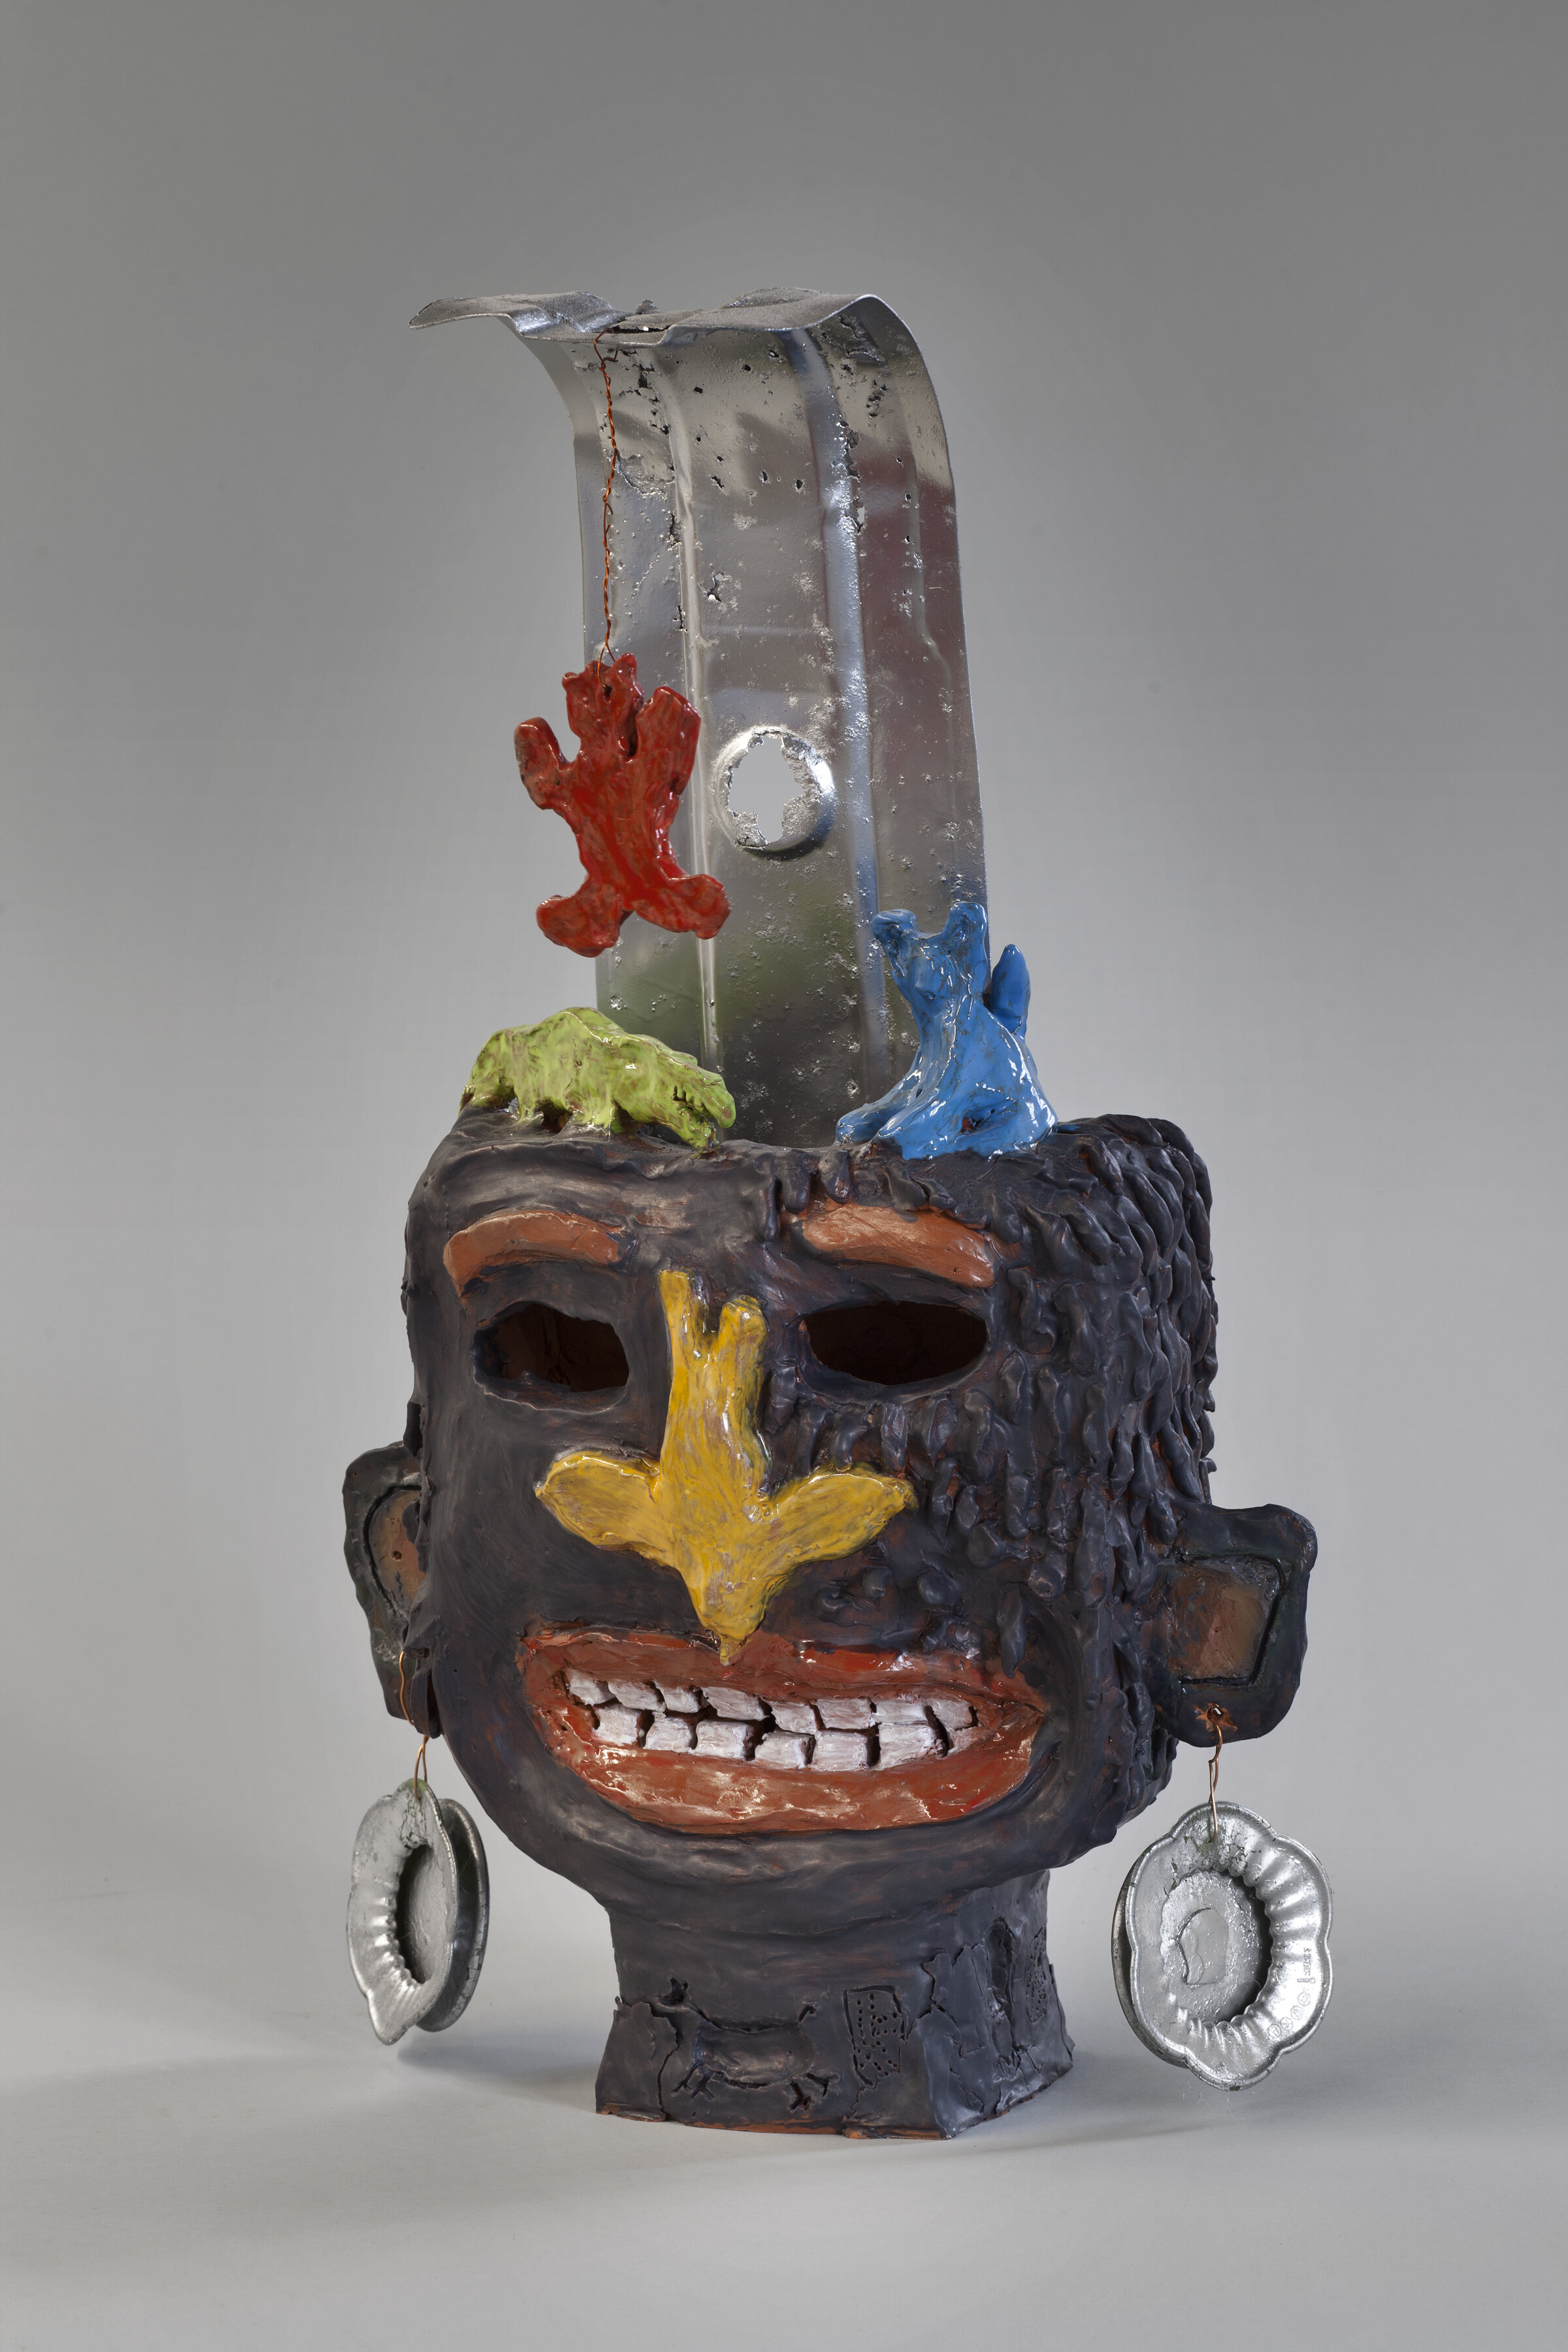   Messenger  Clay and glaze with found objects 24 x 14 x 6.25 in/ 60.9 x 35.5 x 15.8 cm 2021 